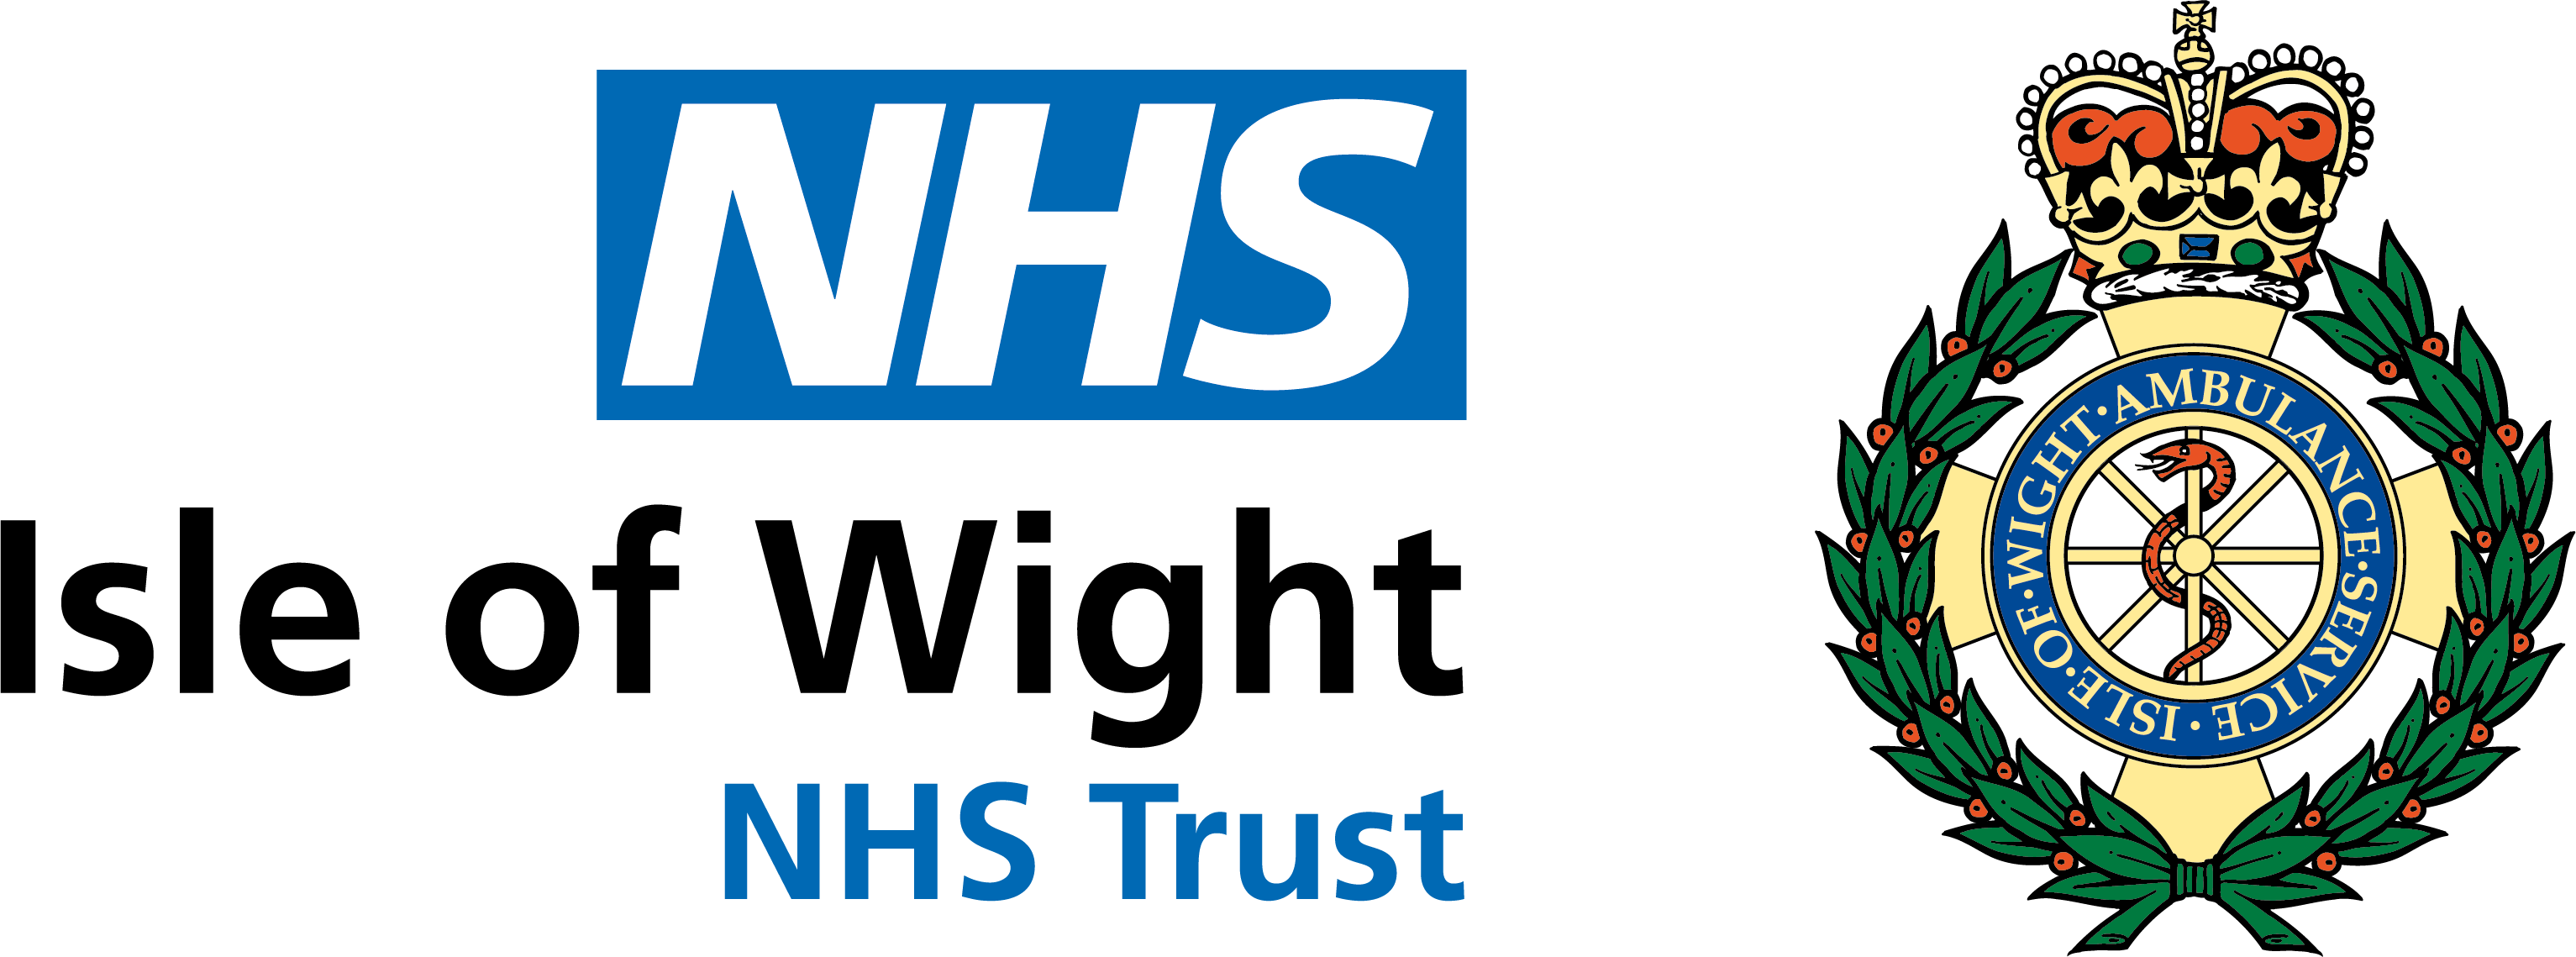 Isle of Wight NHS Trust logo_Standard.png